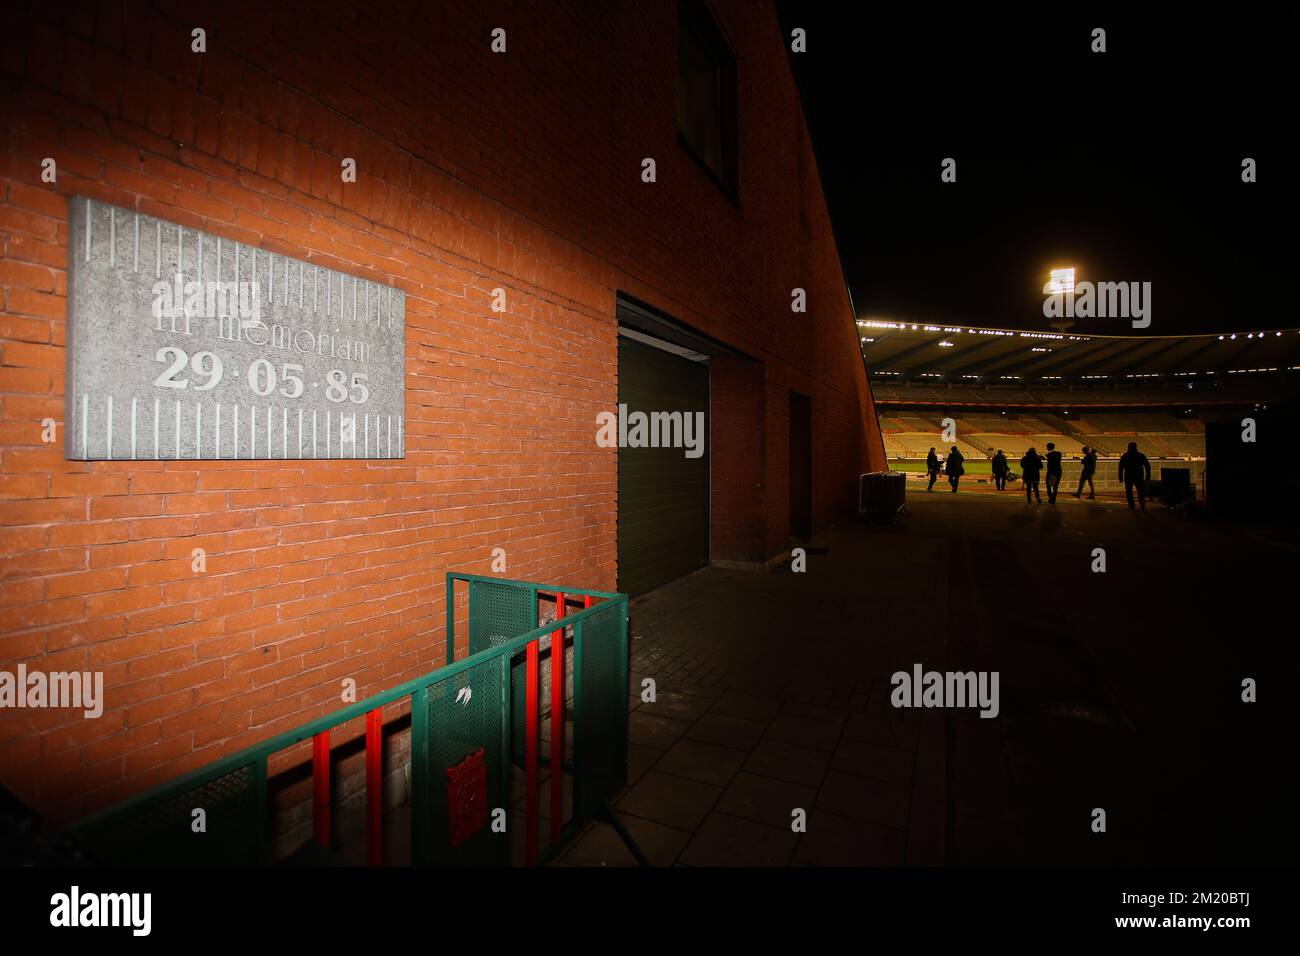 20151112 - BRUSSELS, BELGIUM: Illustration picture shows a tribute to commemorate the Heysel stadium disaster 30 years ago, in Brussels former Heysel stadium, now called King Baudouin stadium (Stade Roi Baudouin - Koning Boudewijnsatdion), Thursday 12 November 2015. On 29 May 1985, 39 persons because of clashes between supporters and the collapse of a part of a stand, before the start of the European Cup final between Liverpool and Juventus. Red Devils Belgian national team is playing a friendly games against Italy tomorrow in preparation of Euro2016. BELGA PHOTO BRUNO FAHY Stock Photo